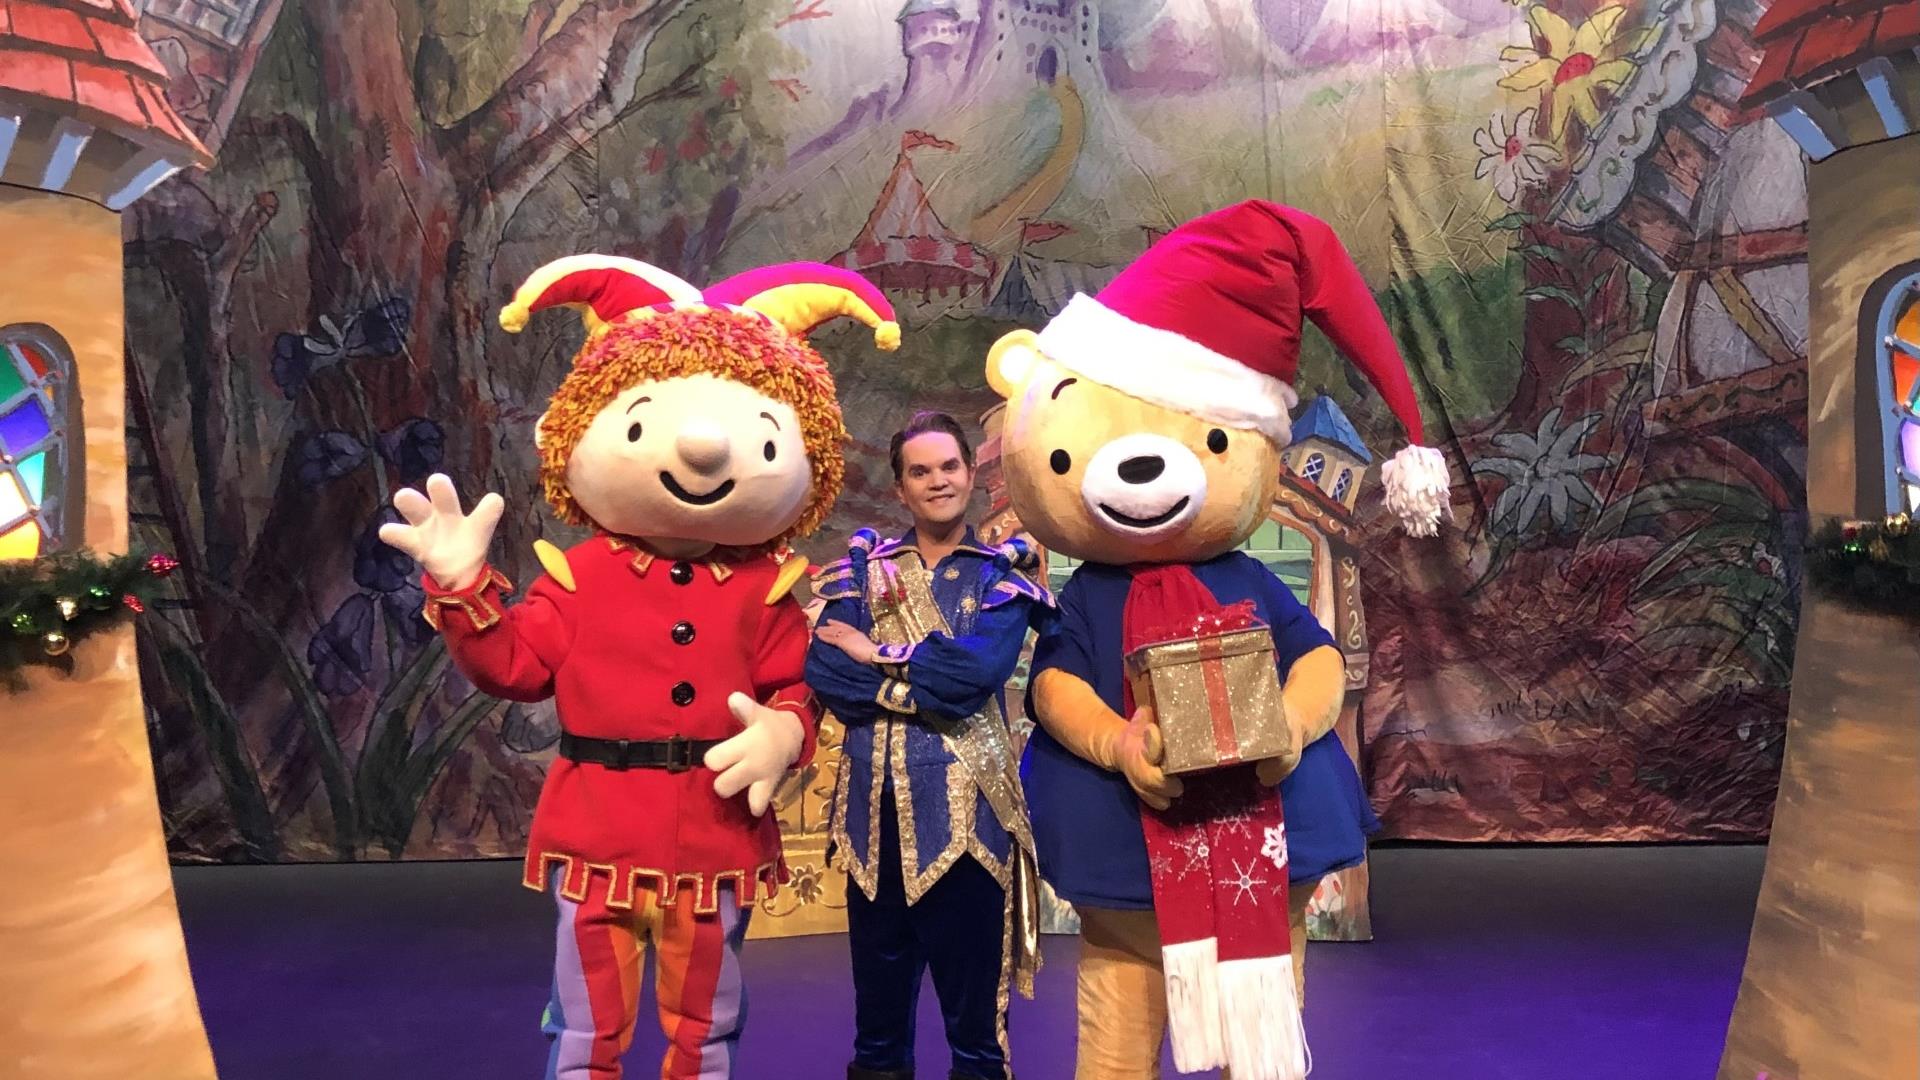 Mr Hullabaloo with two characters on stage